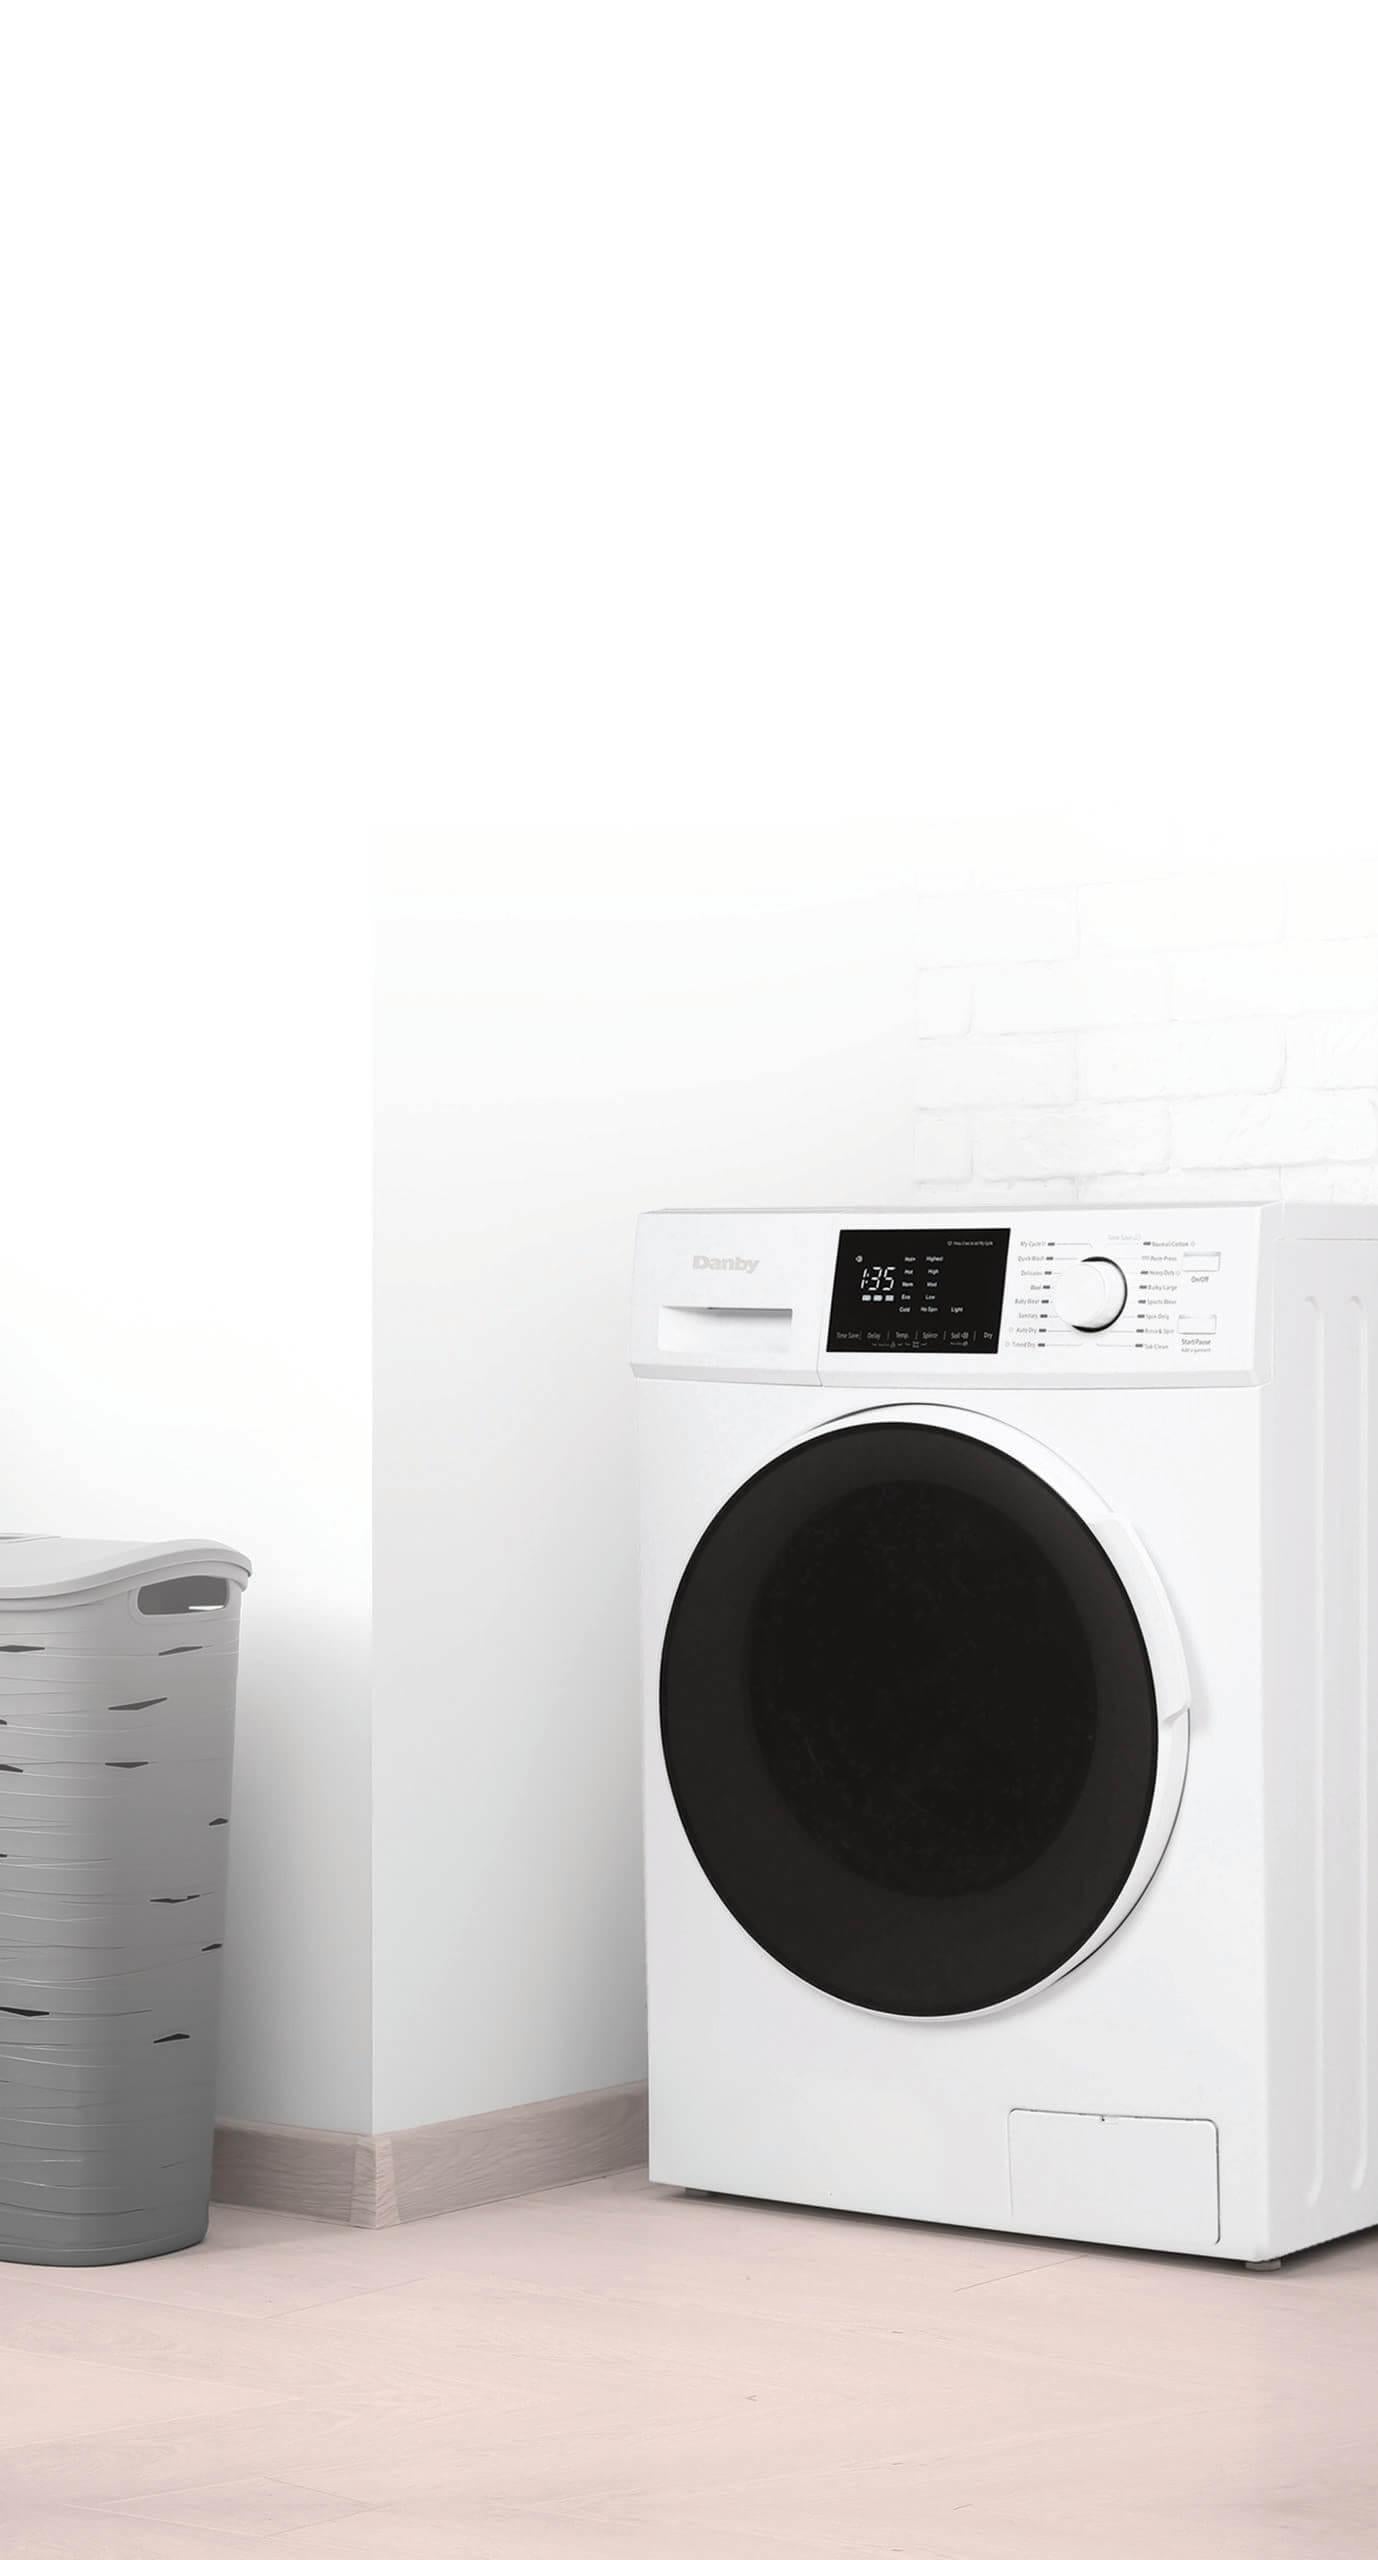 Danby 2.7 cu. ft. All-In-One Washer